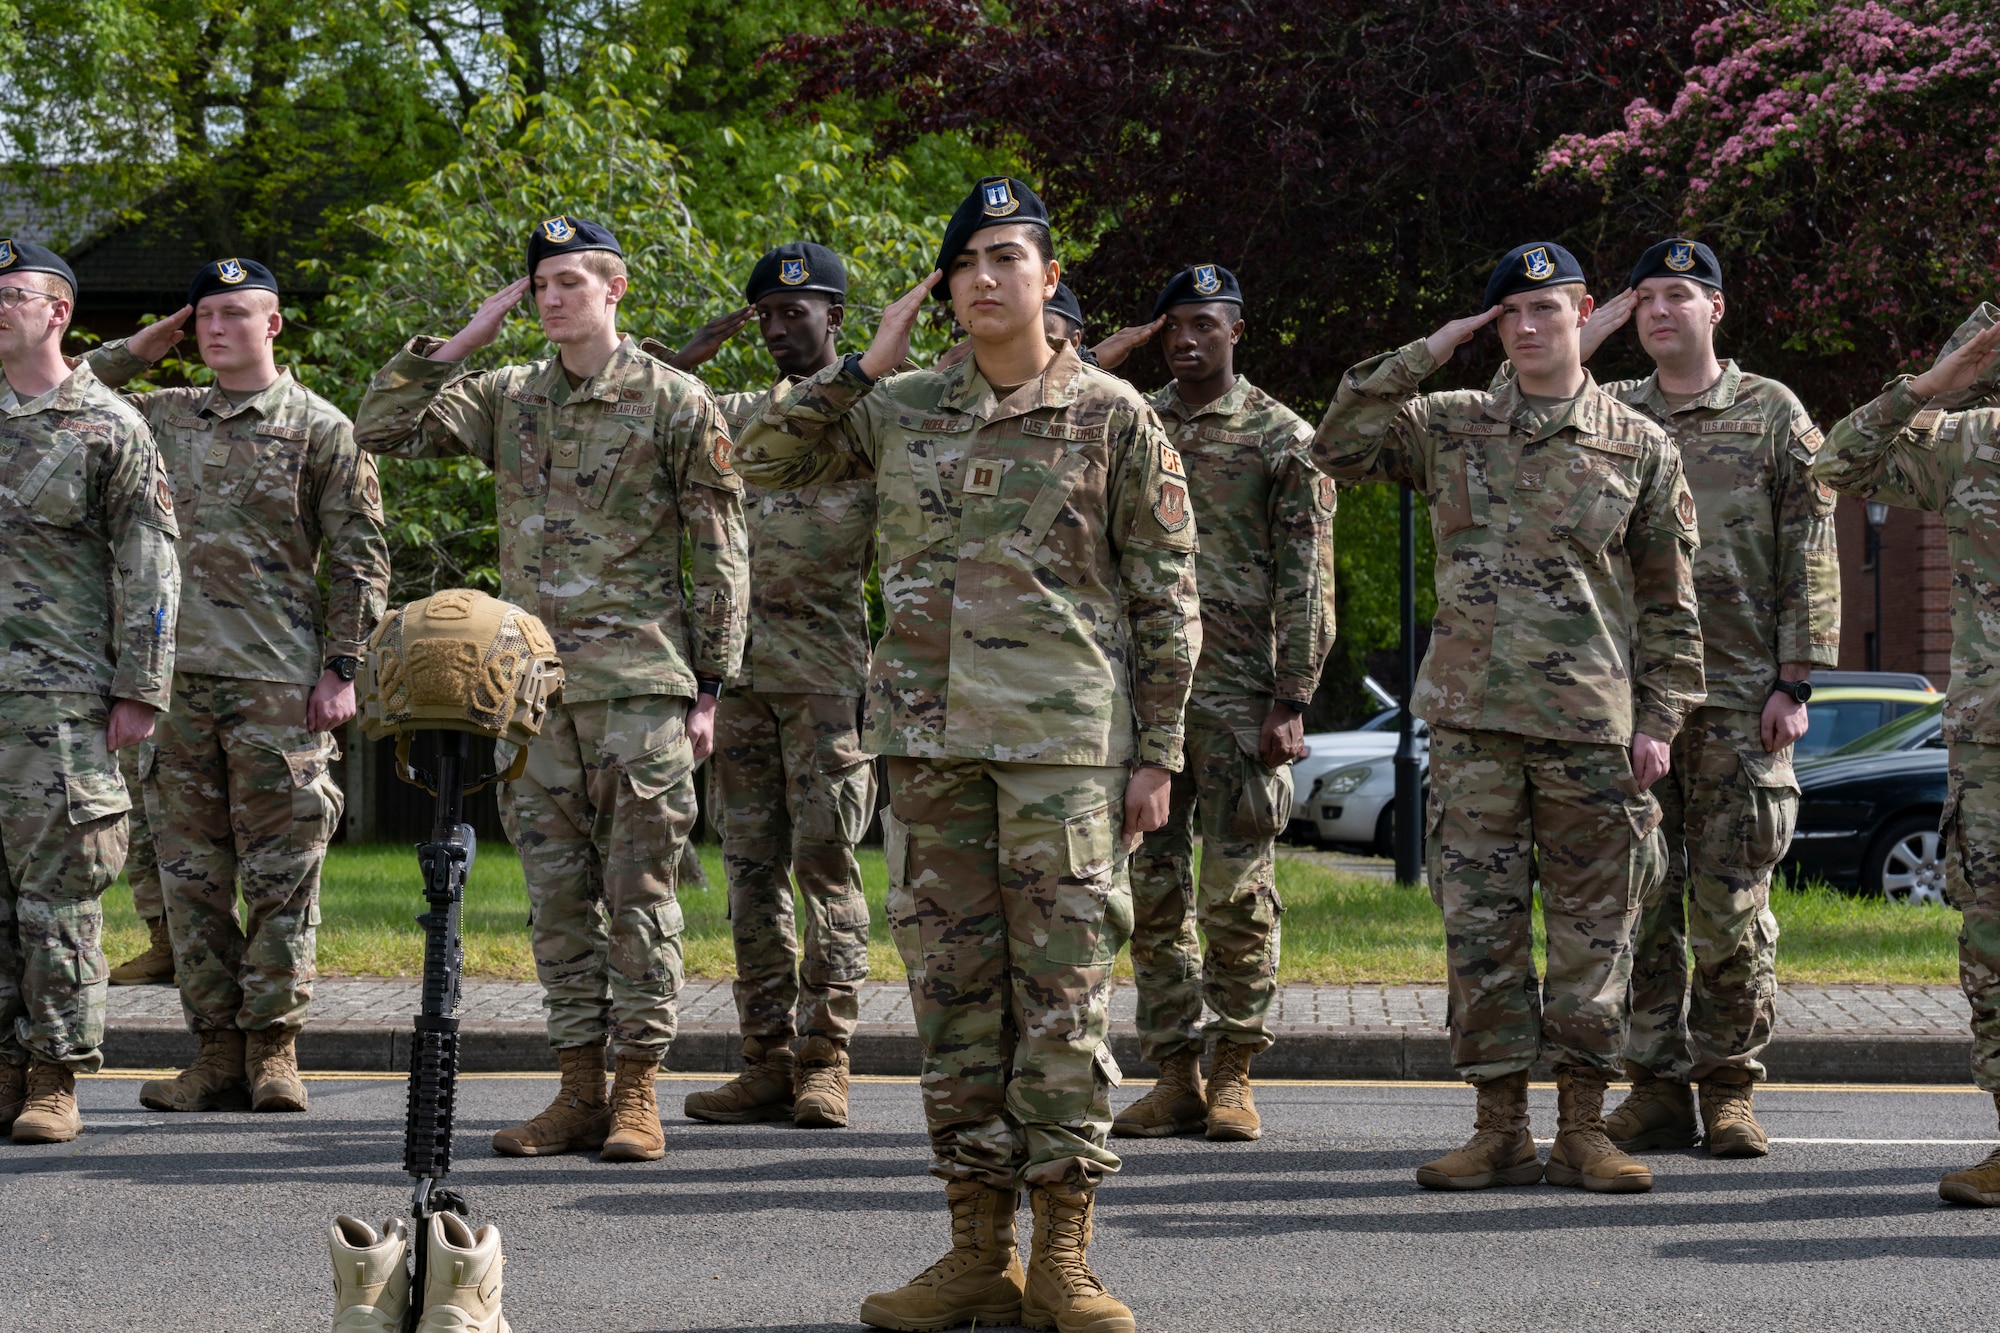 Team Mildenhall personnel gathered for various events and ceremonies during the week in honor of the Defenders who serve their country, defend the bases and protect the Airmen.